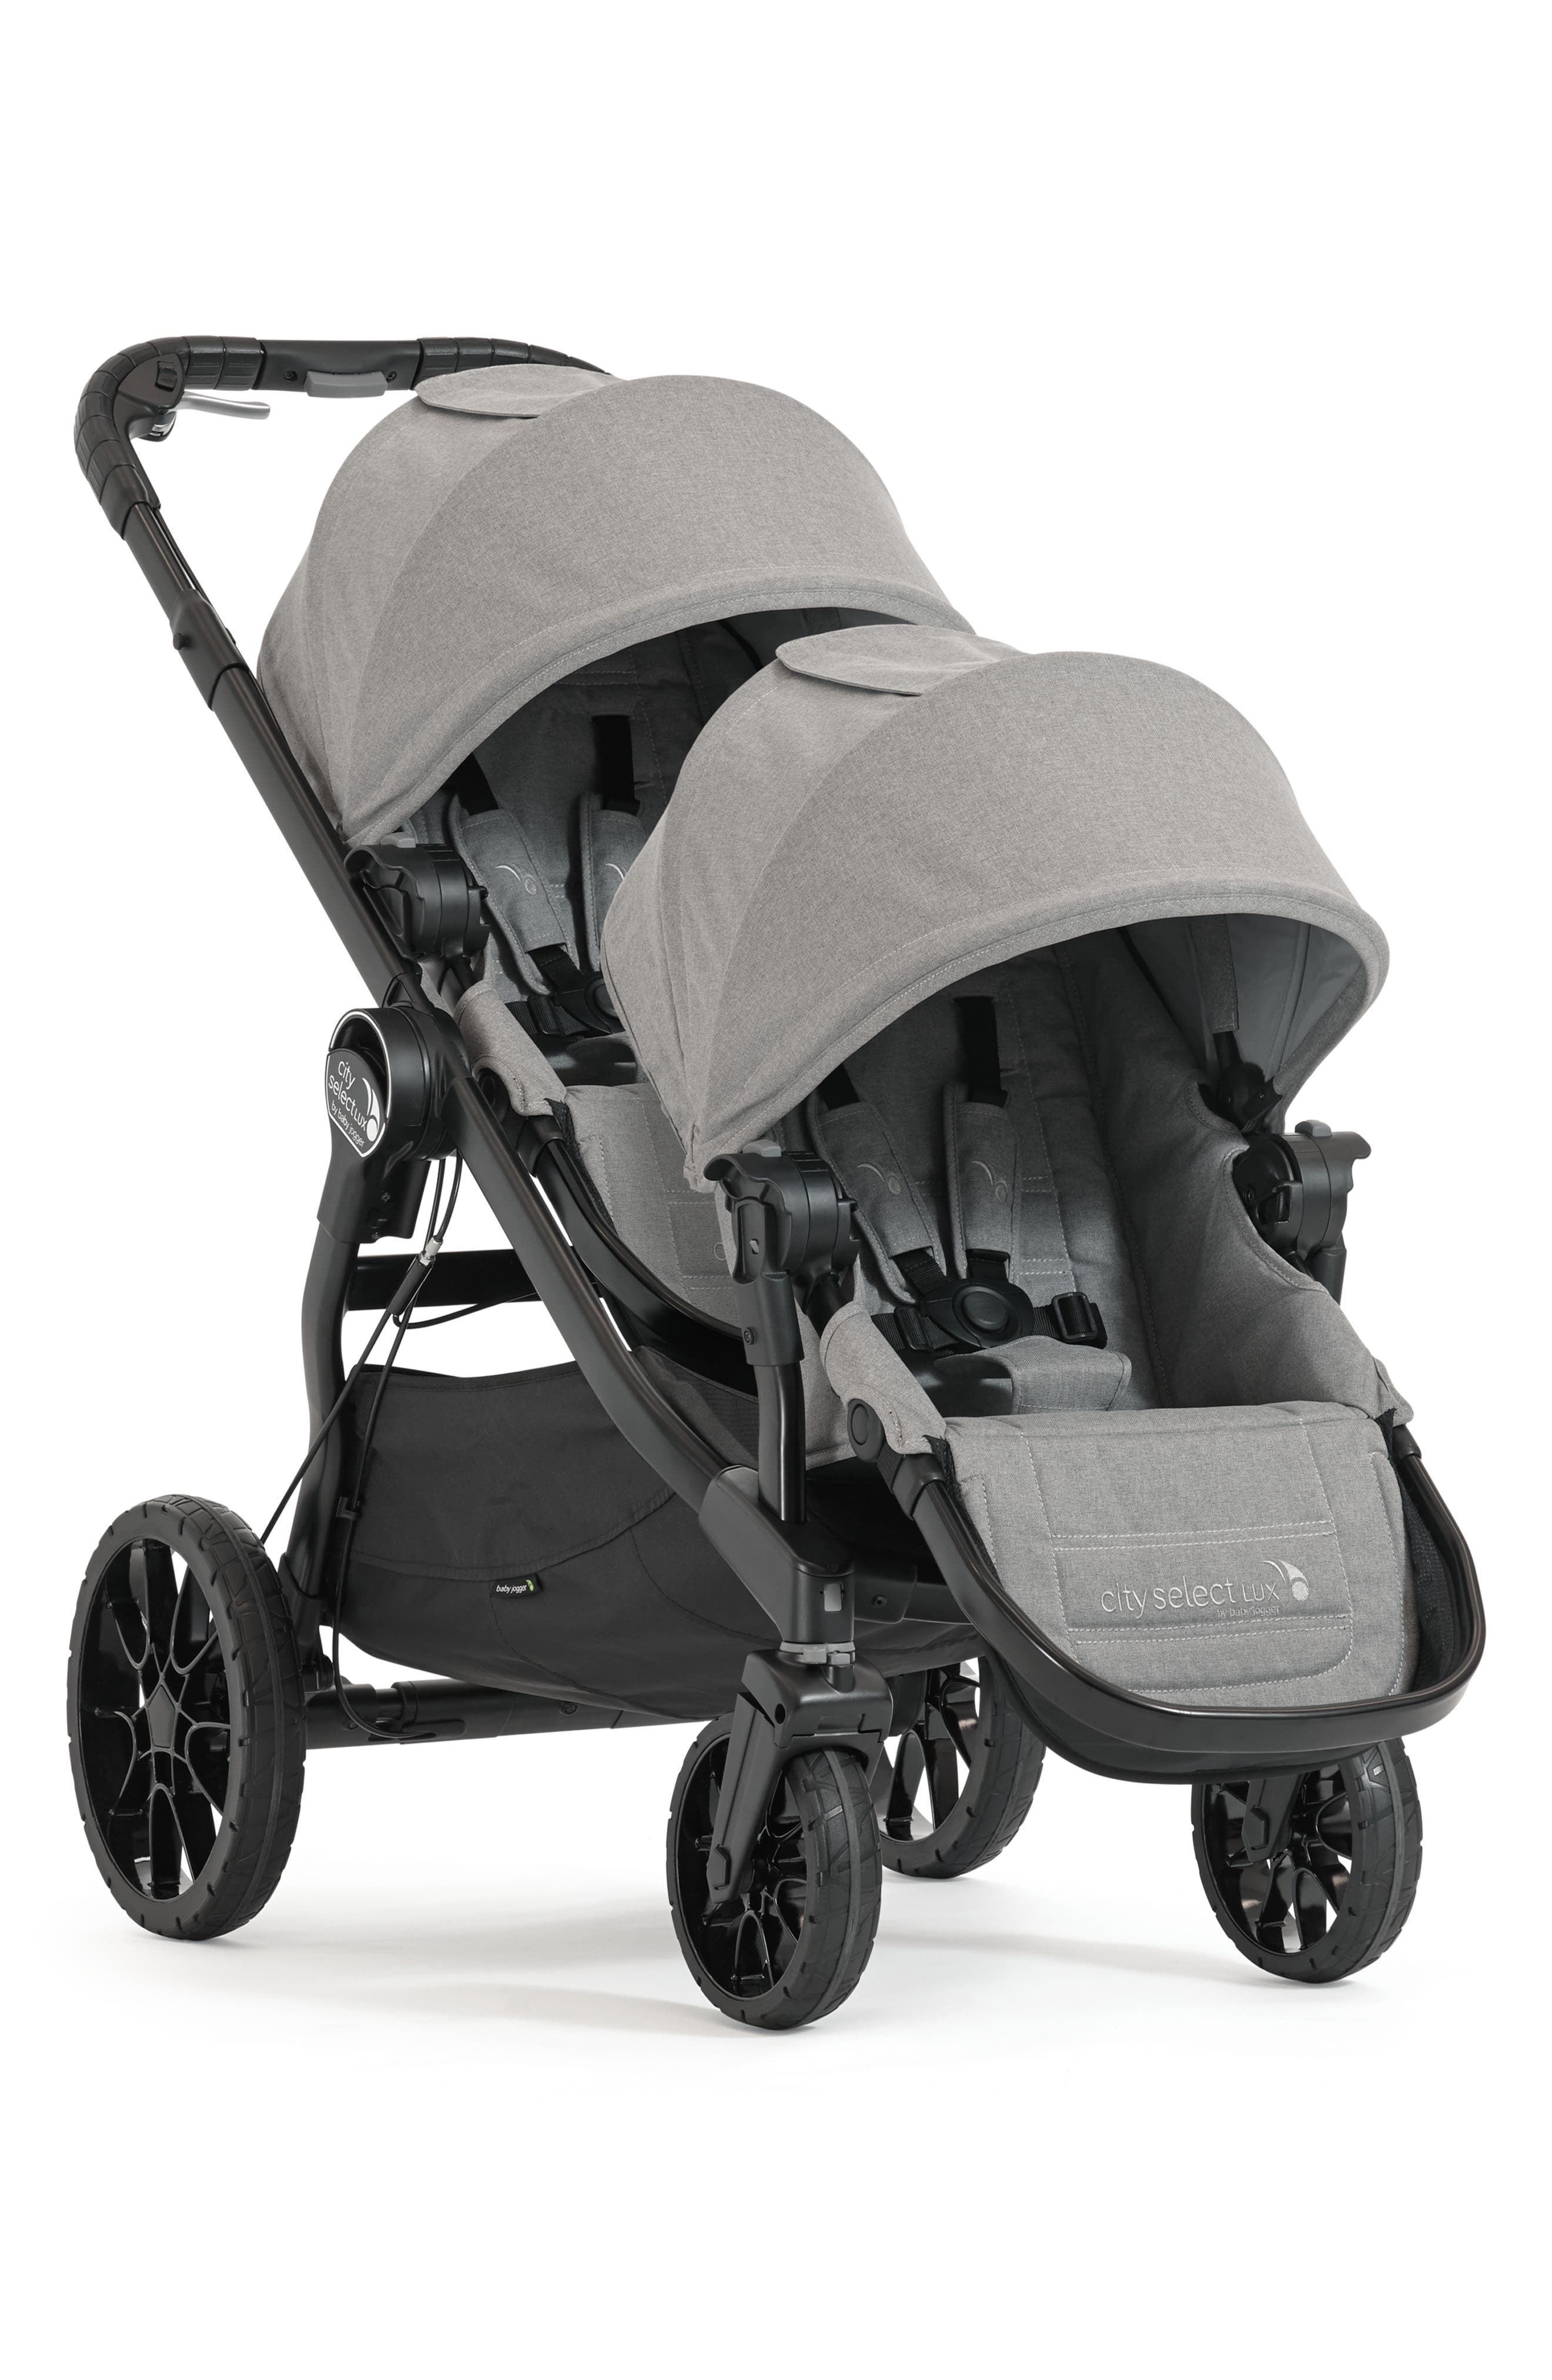 baby jogger on sale